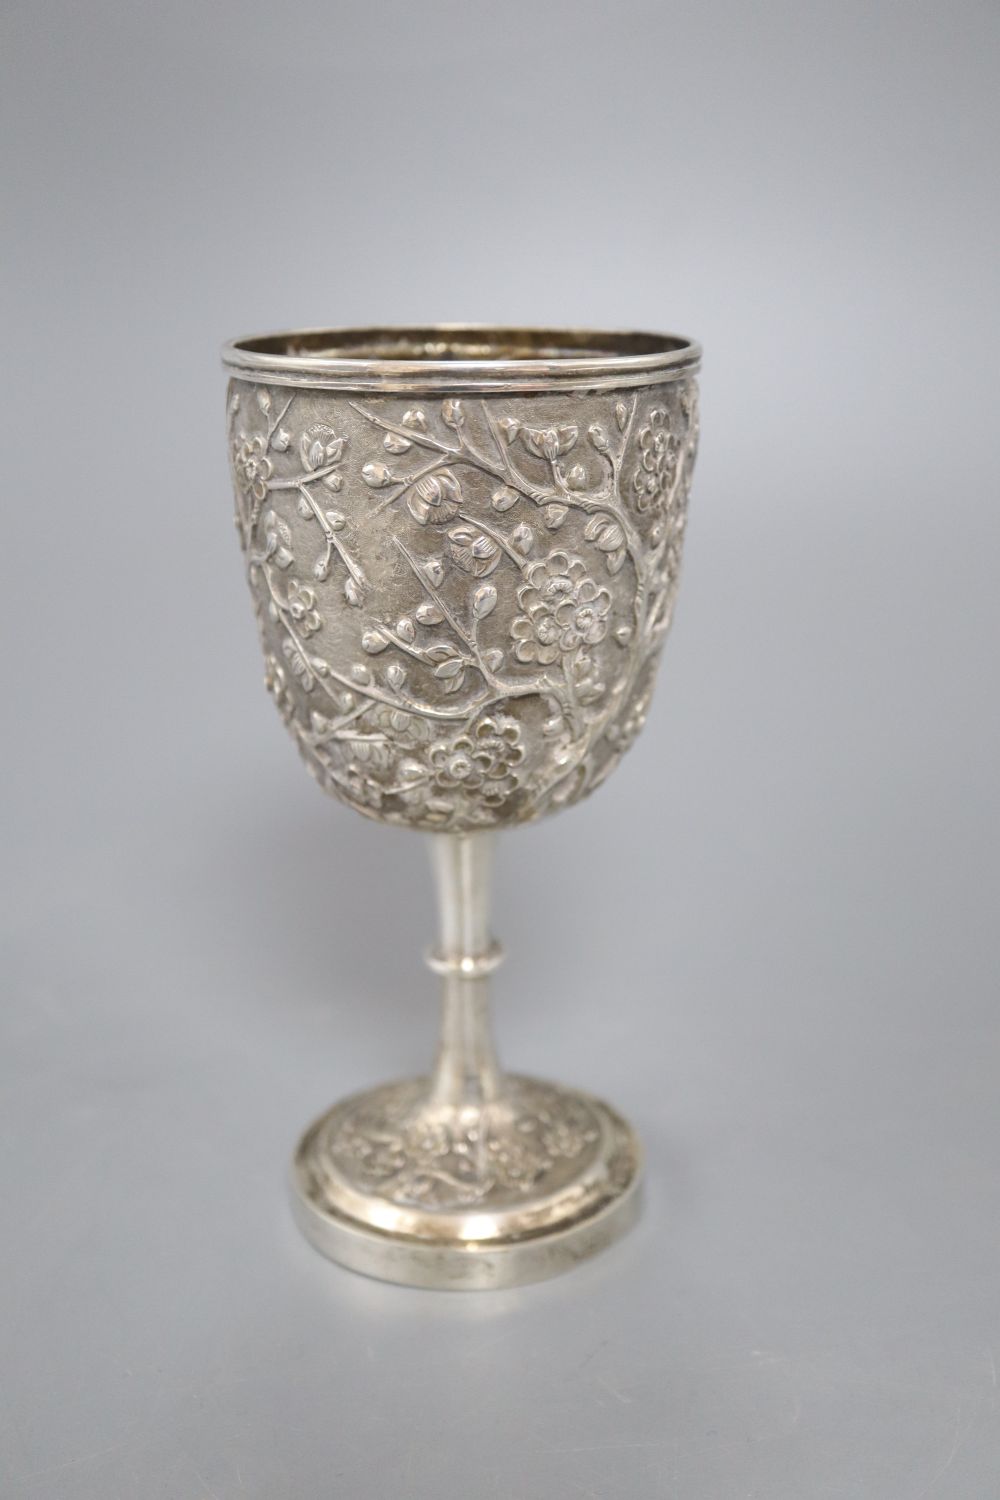 An early 20th century Chinese Export white metal goblet by Wang Hing, Hong Kong, 14.2cm, 159 grams.